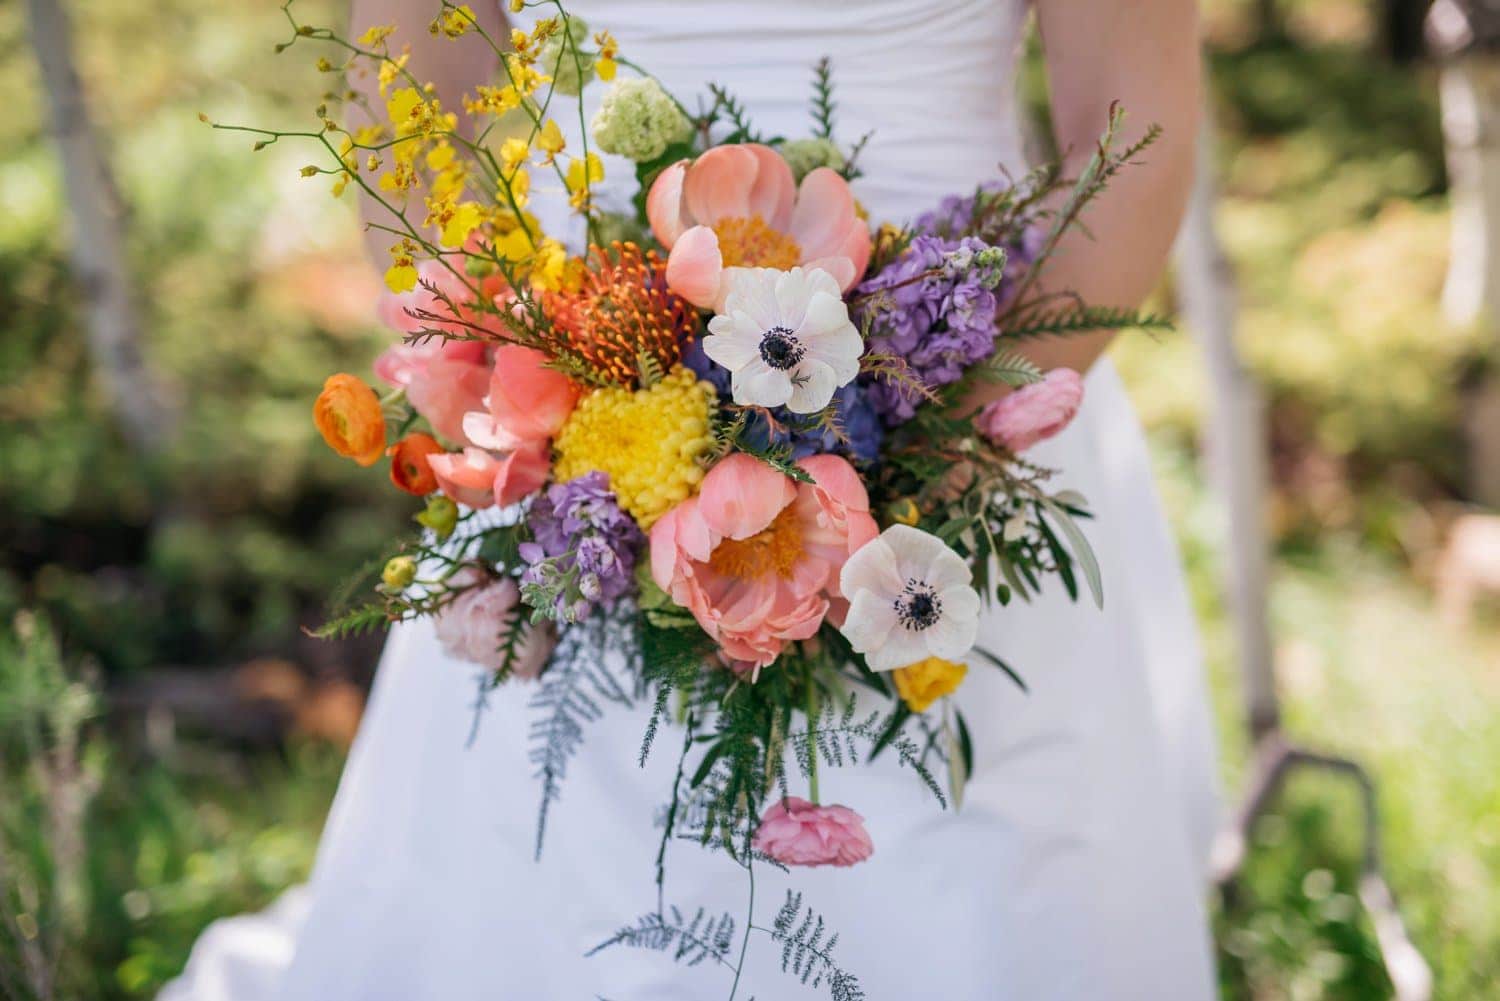 Close-up bride holding a bouquet. The flowers are a variety of light pink, purple yellow, orange, and white.